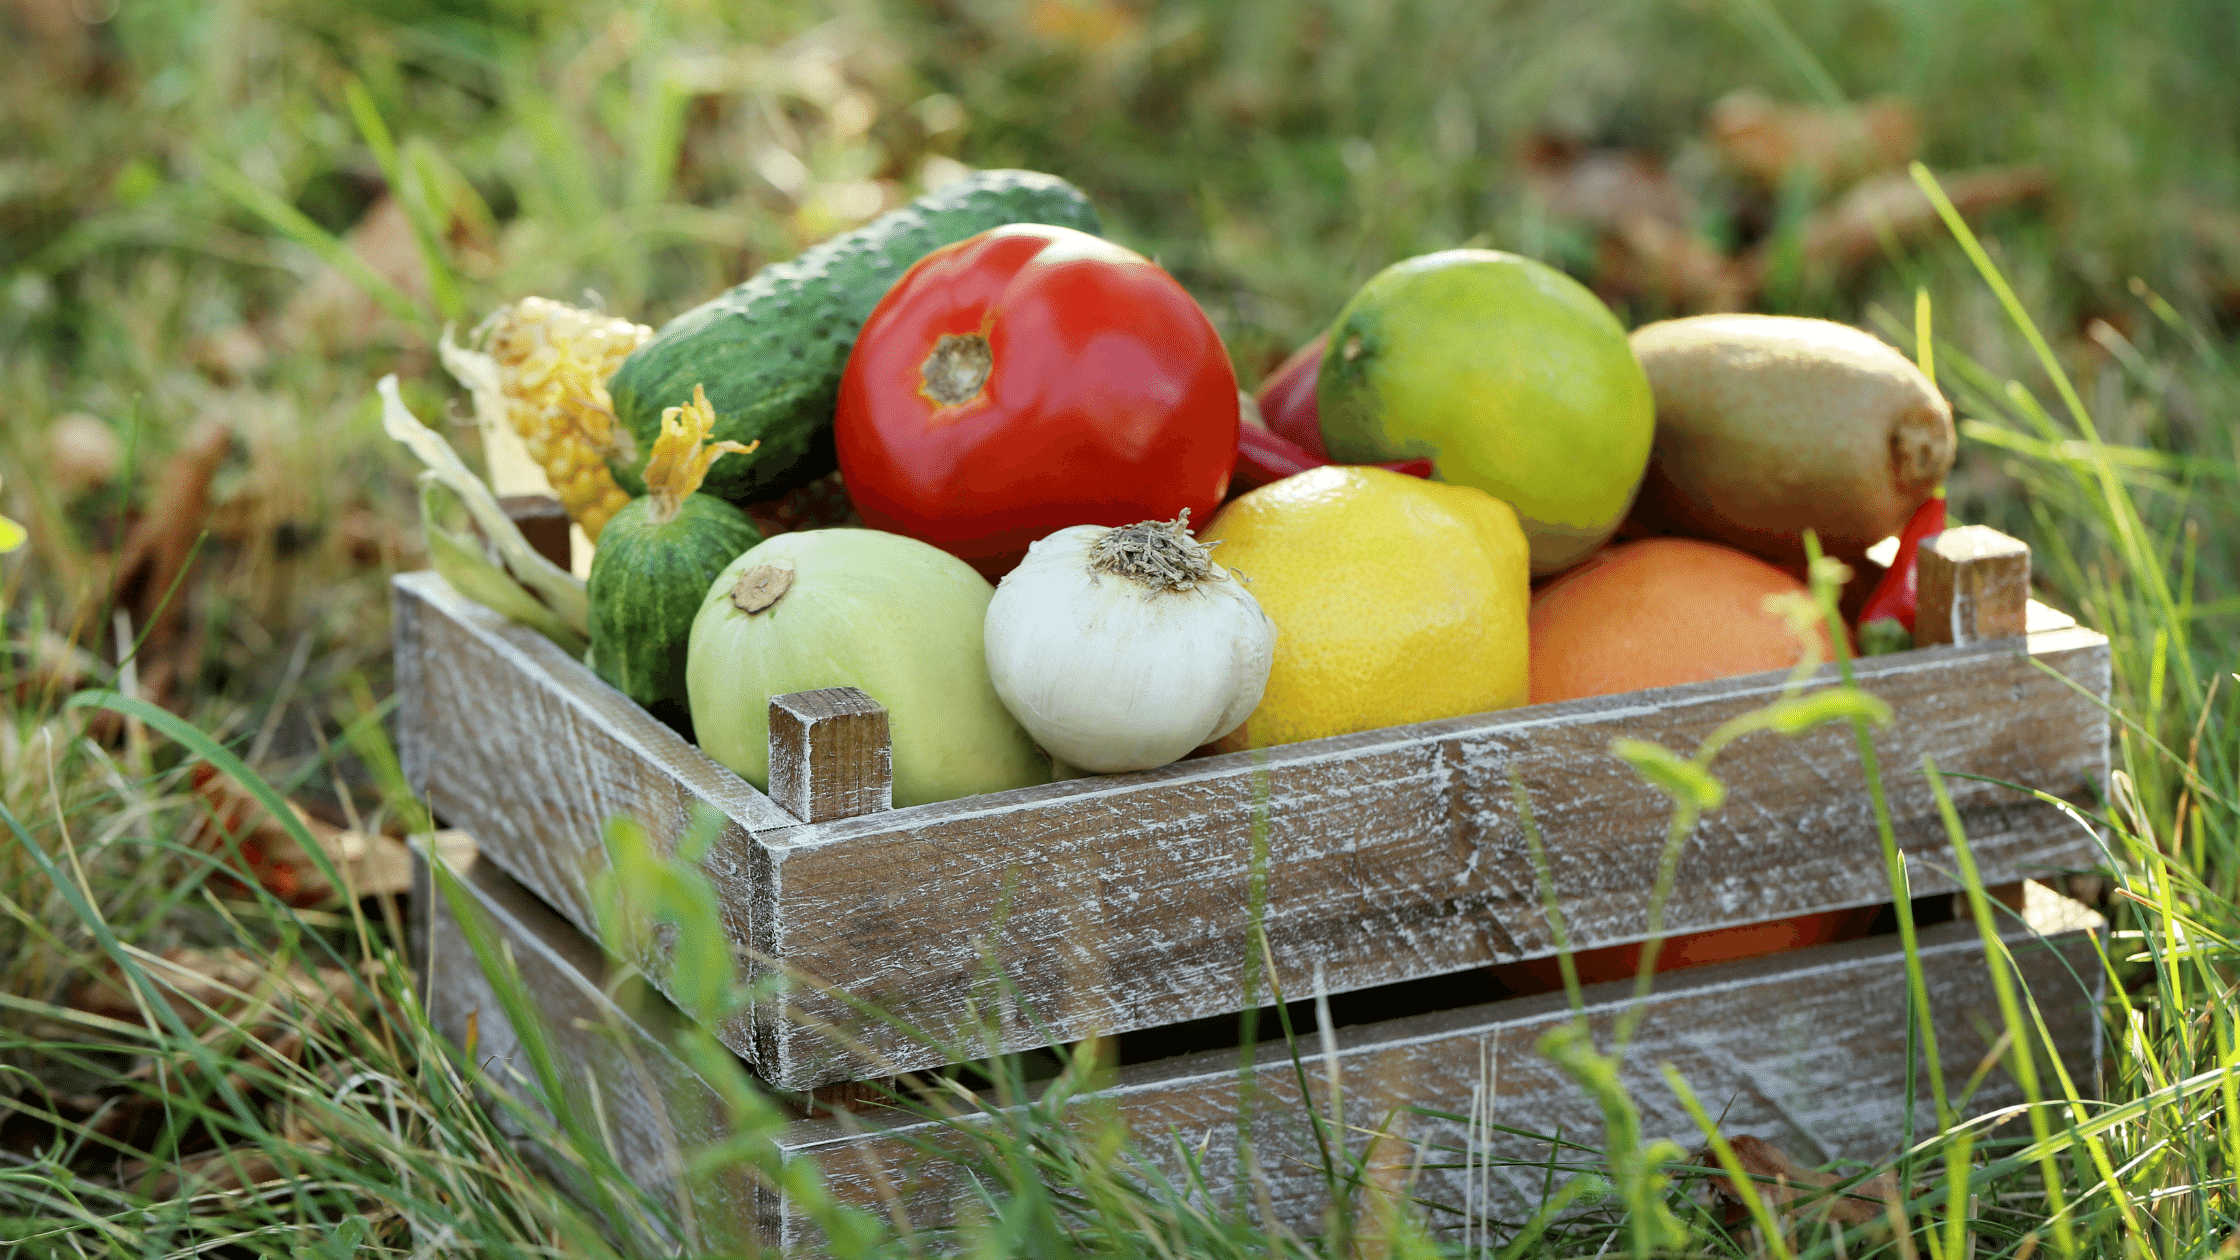 Growing Food in the Wrong Season Can Affect the Taste